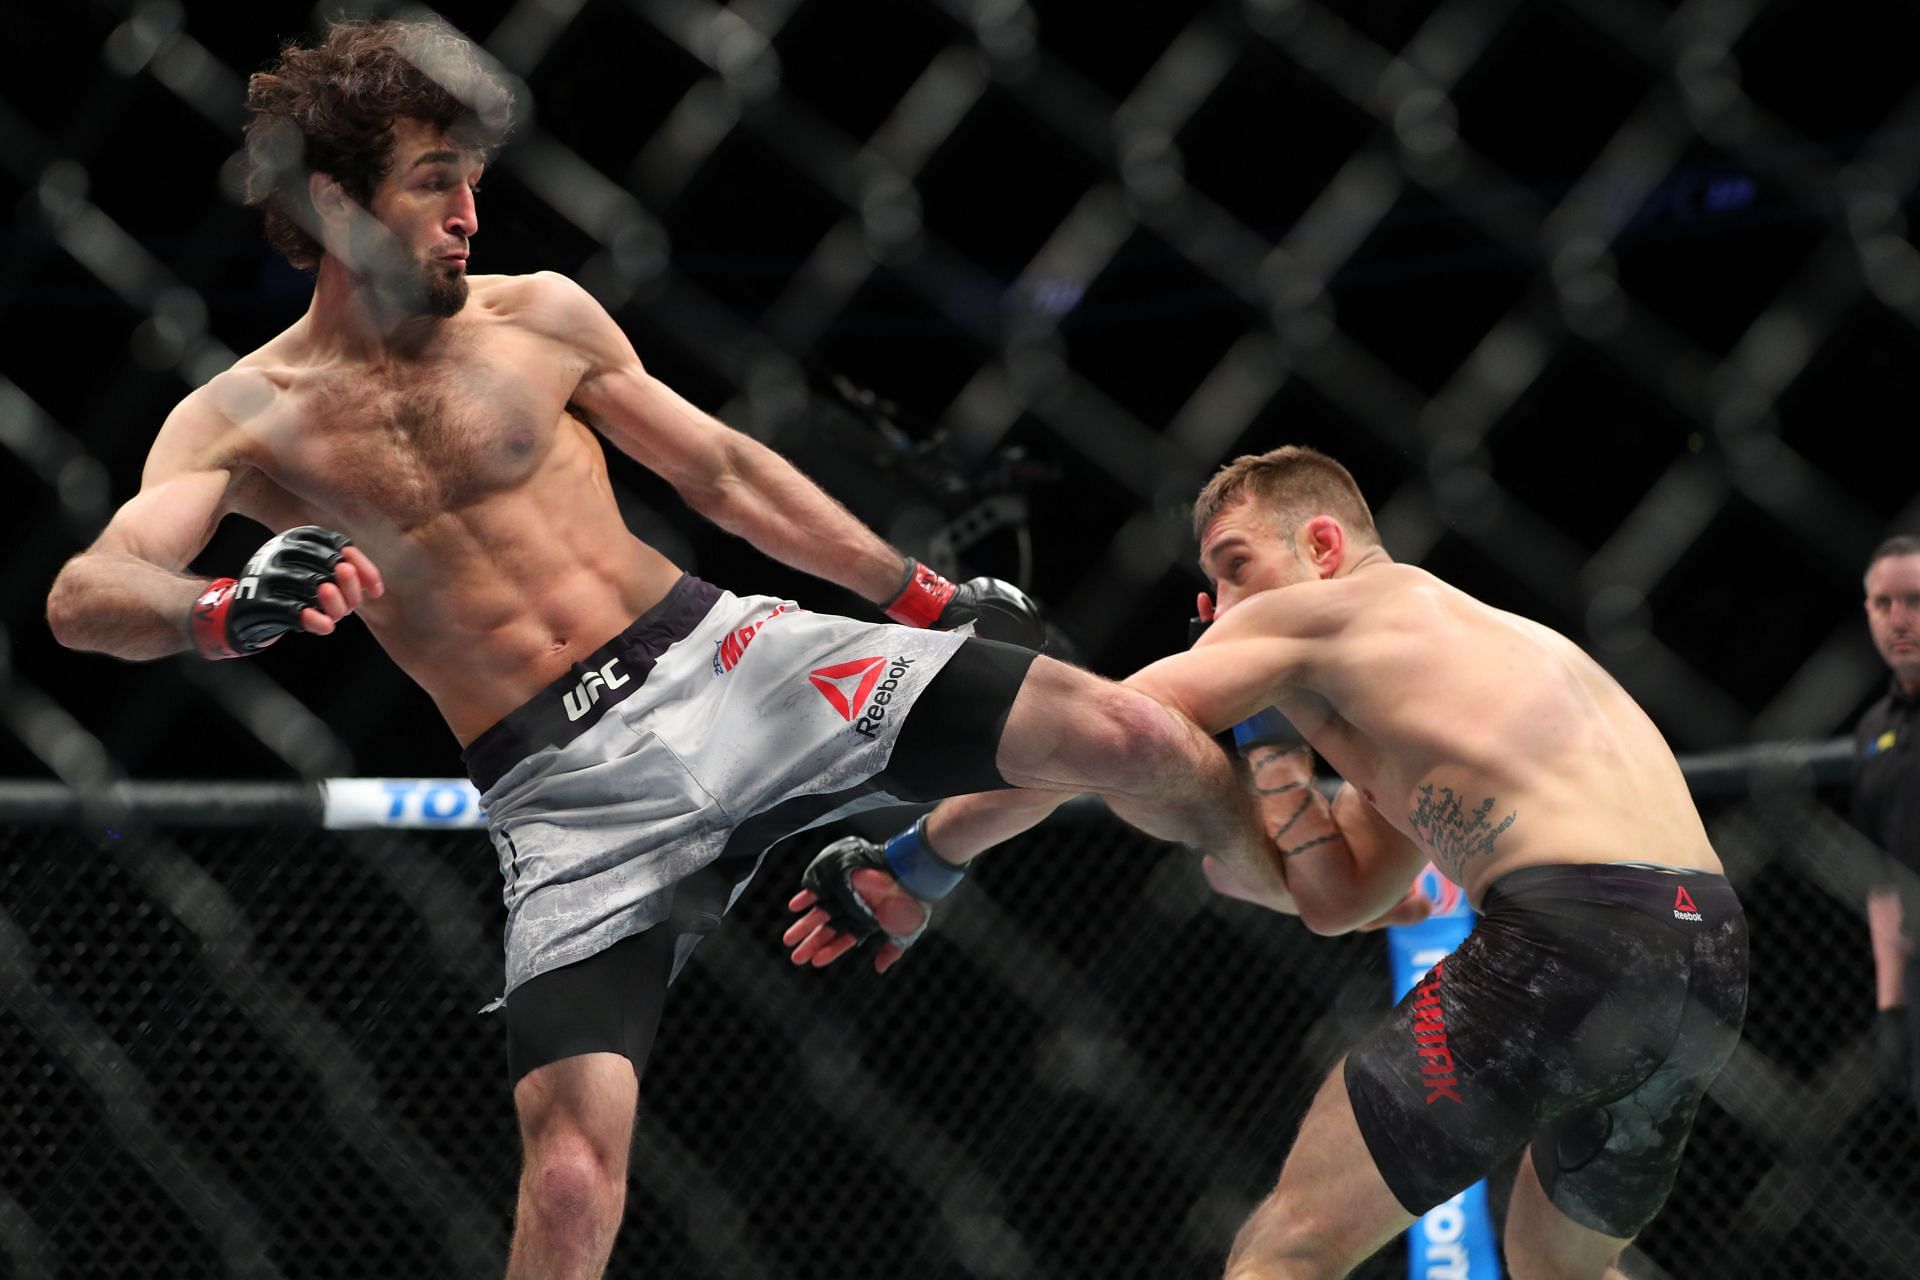 Zabit Magomedsharipov could rise into UFC title contention if he returns in 2022